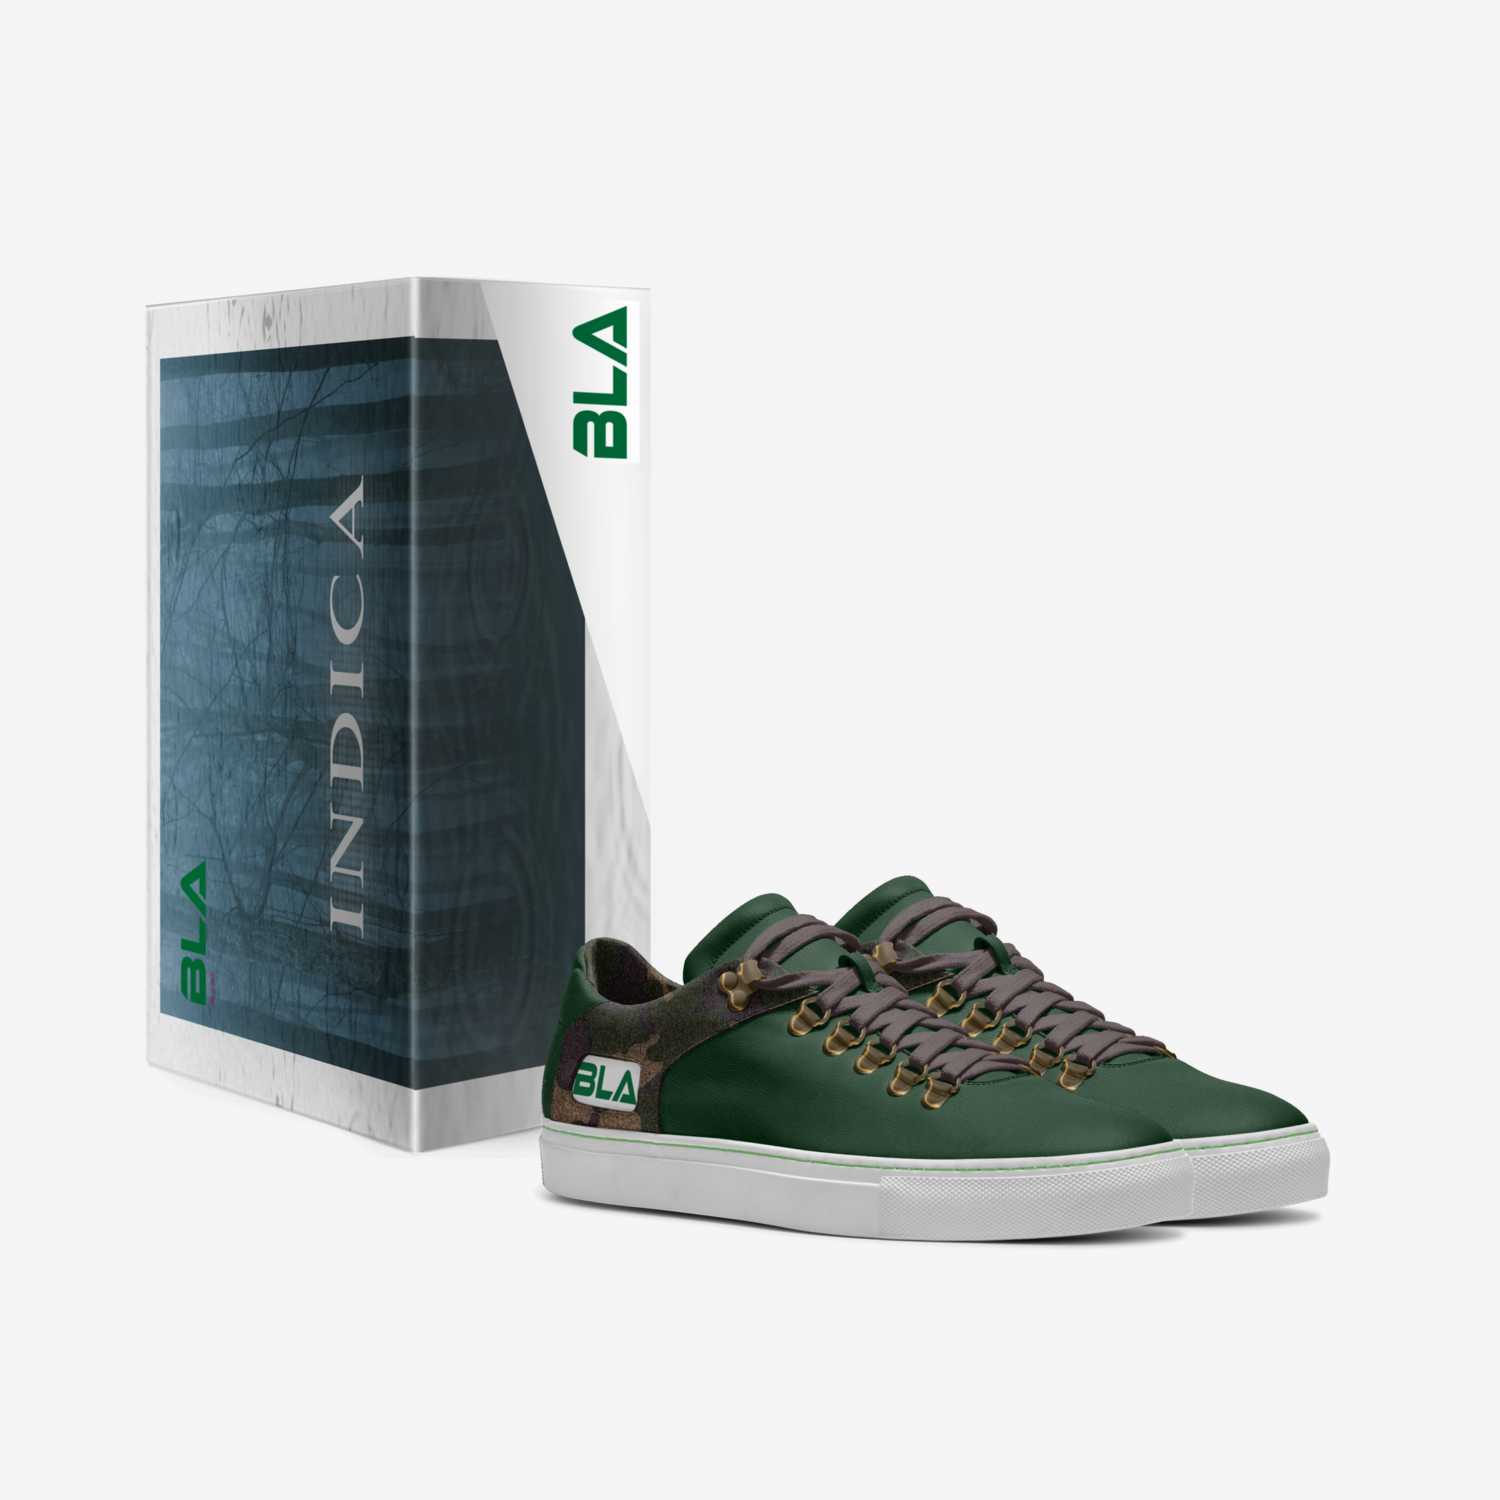 INDICA custom made in Italy shoes by Dwayne Bester | Box view